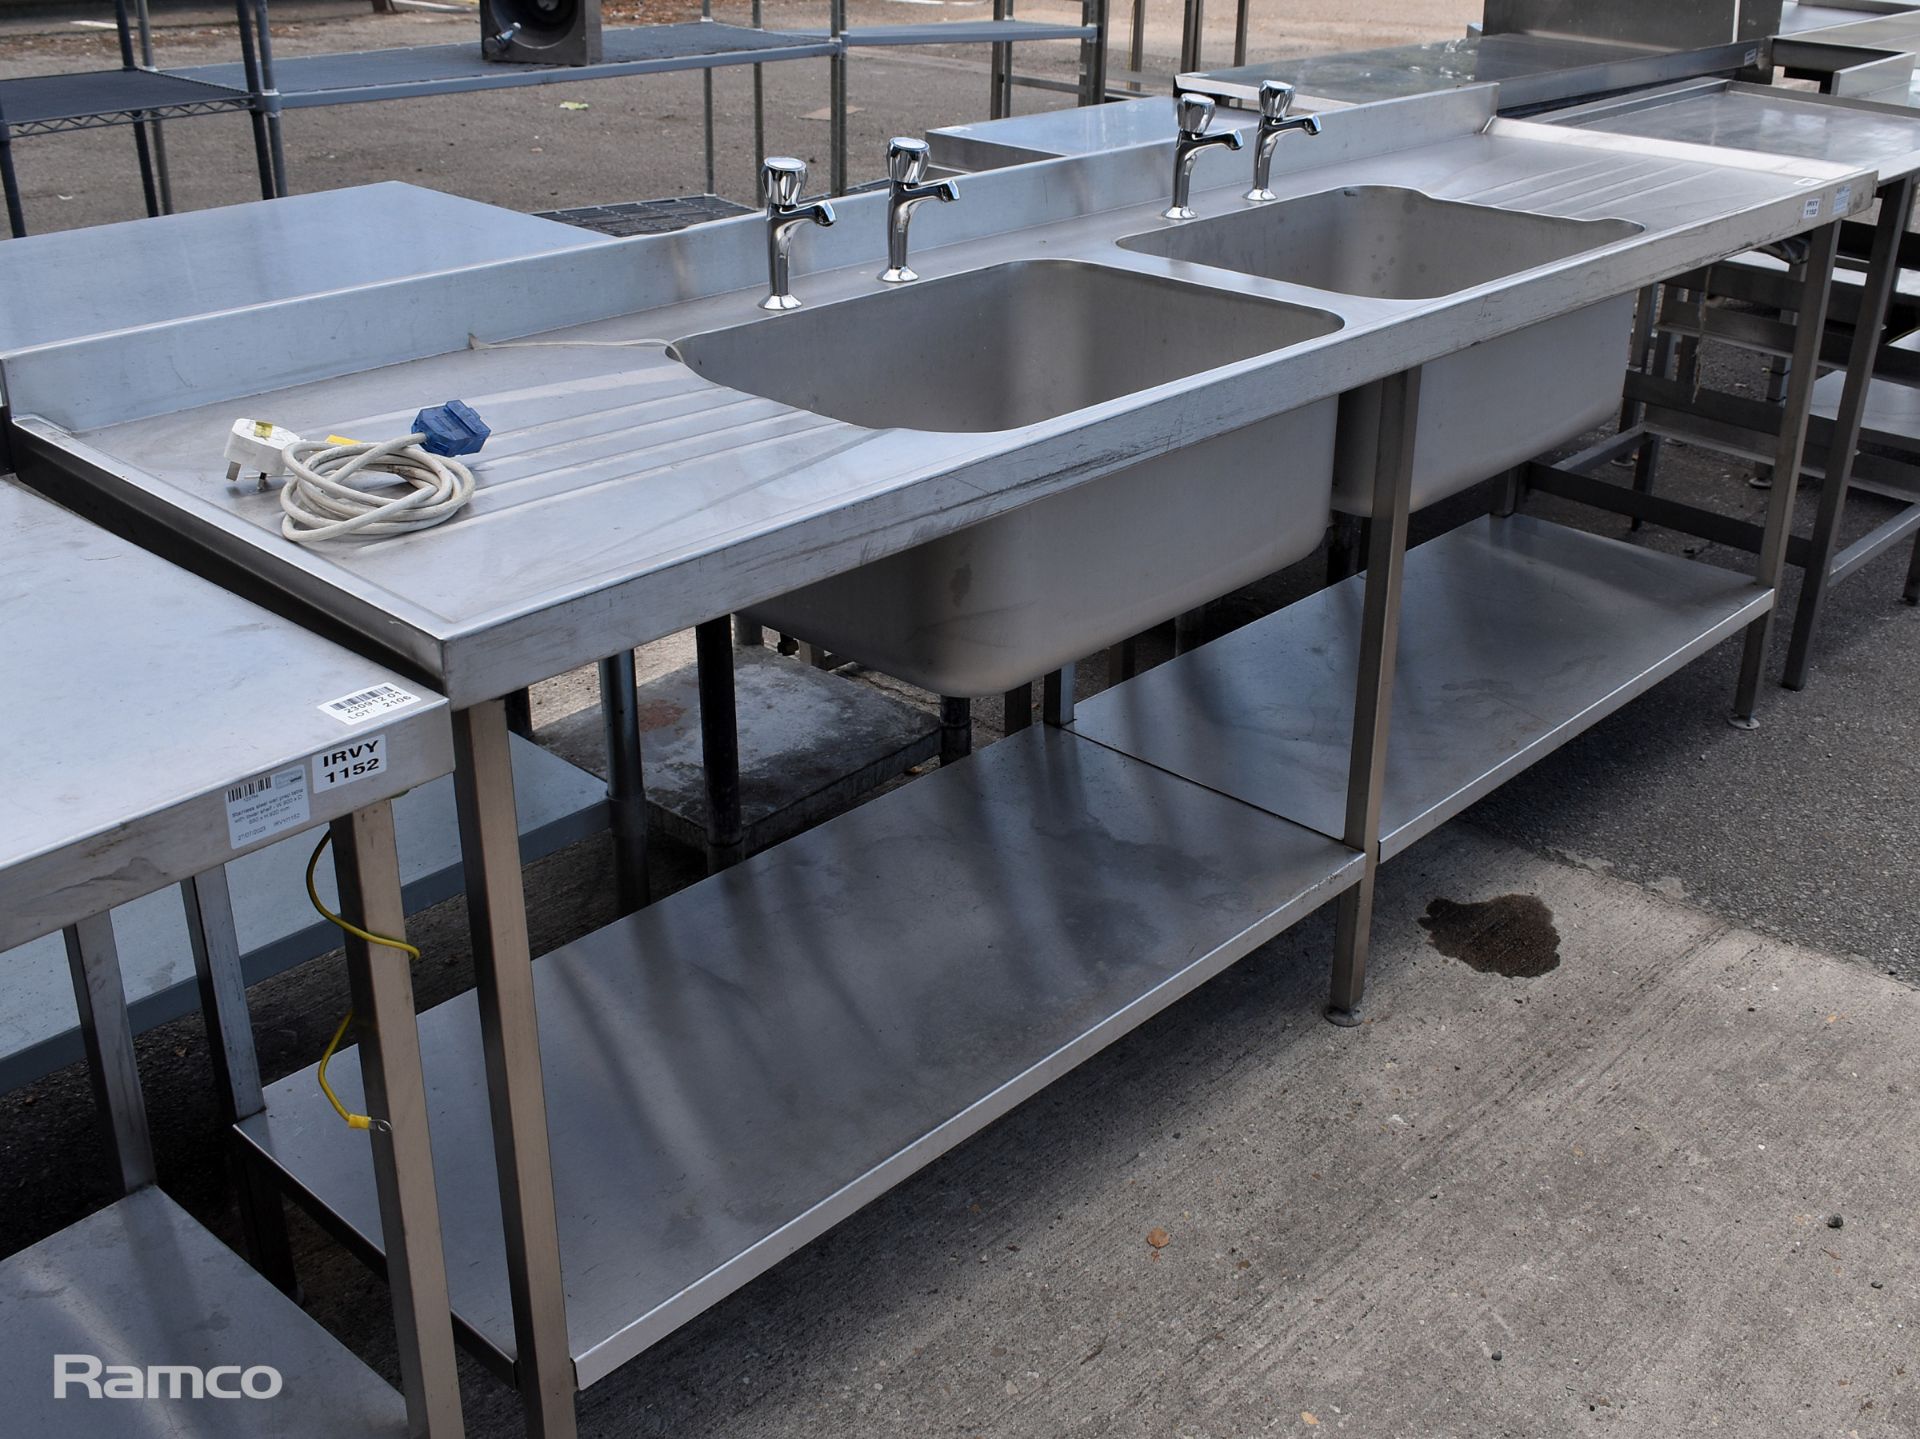 Stainless steel large double sink unit with lower shelf - W 2400 x D 650 x H 1030mm - Image 2 of 6